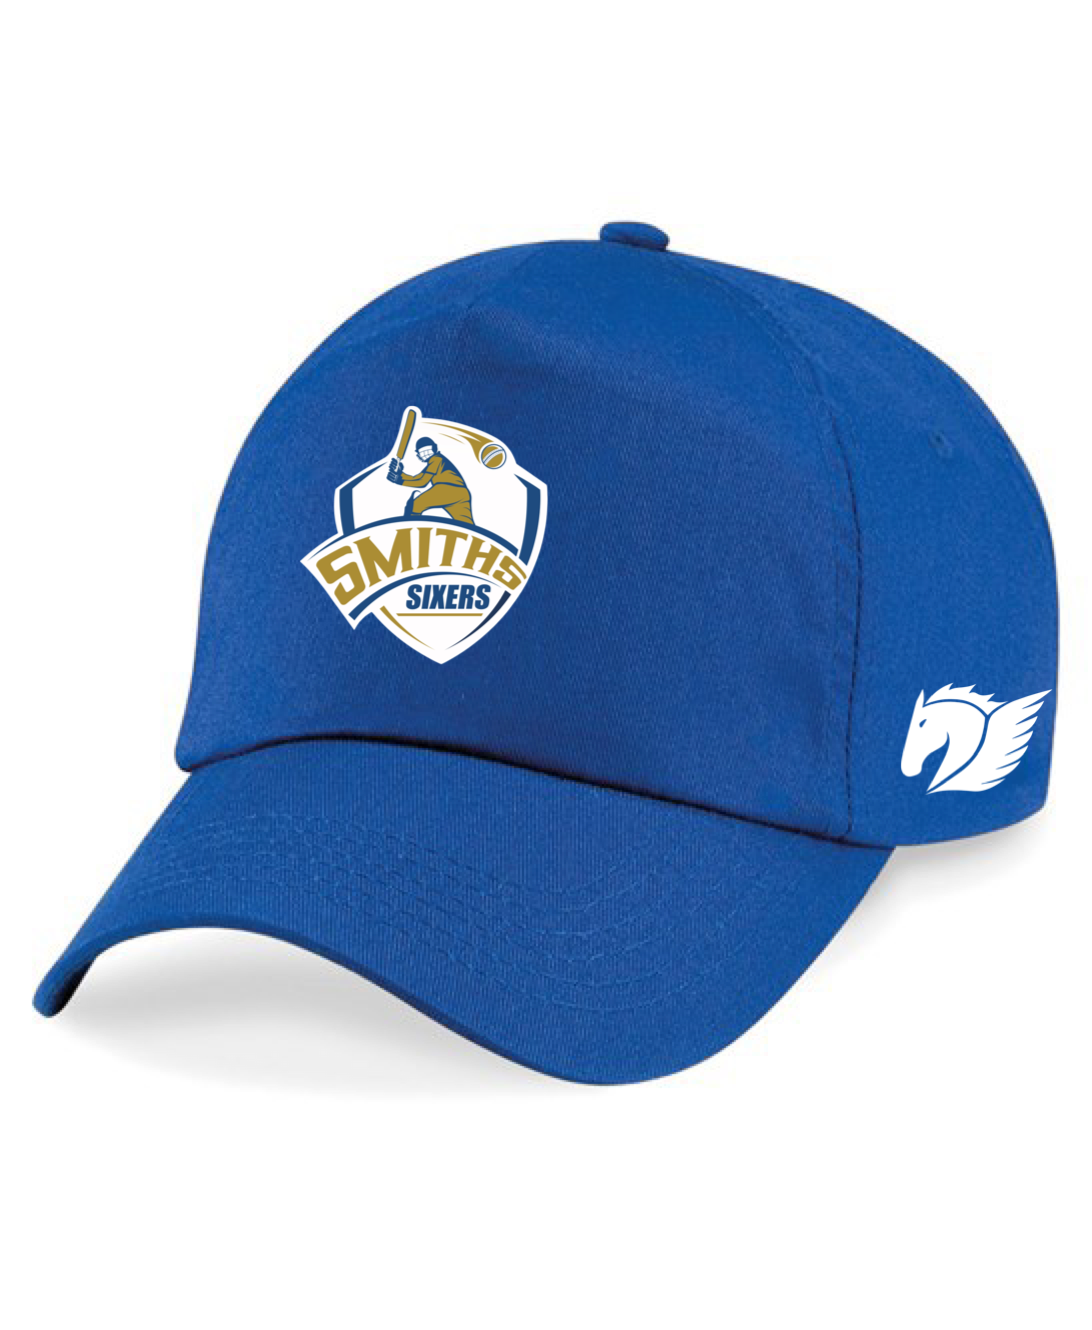 Smiths Sixers Supporters Cap